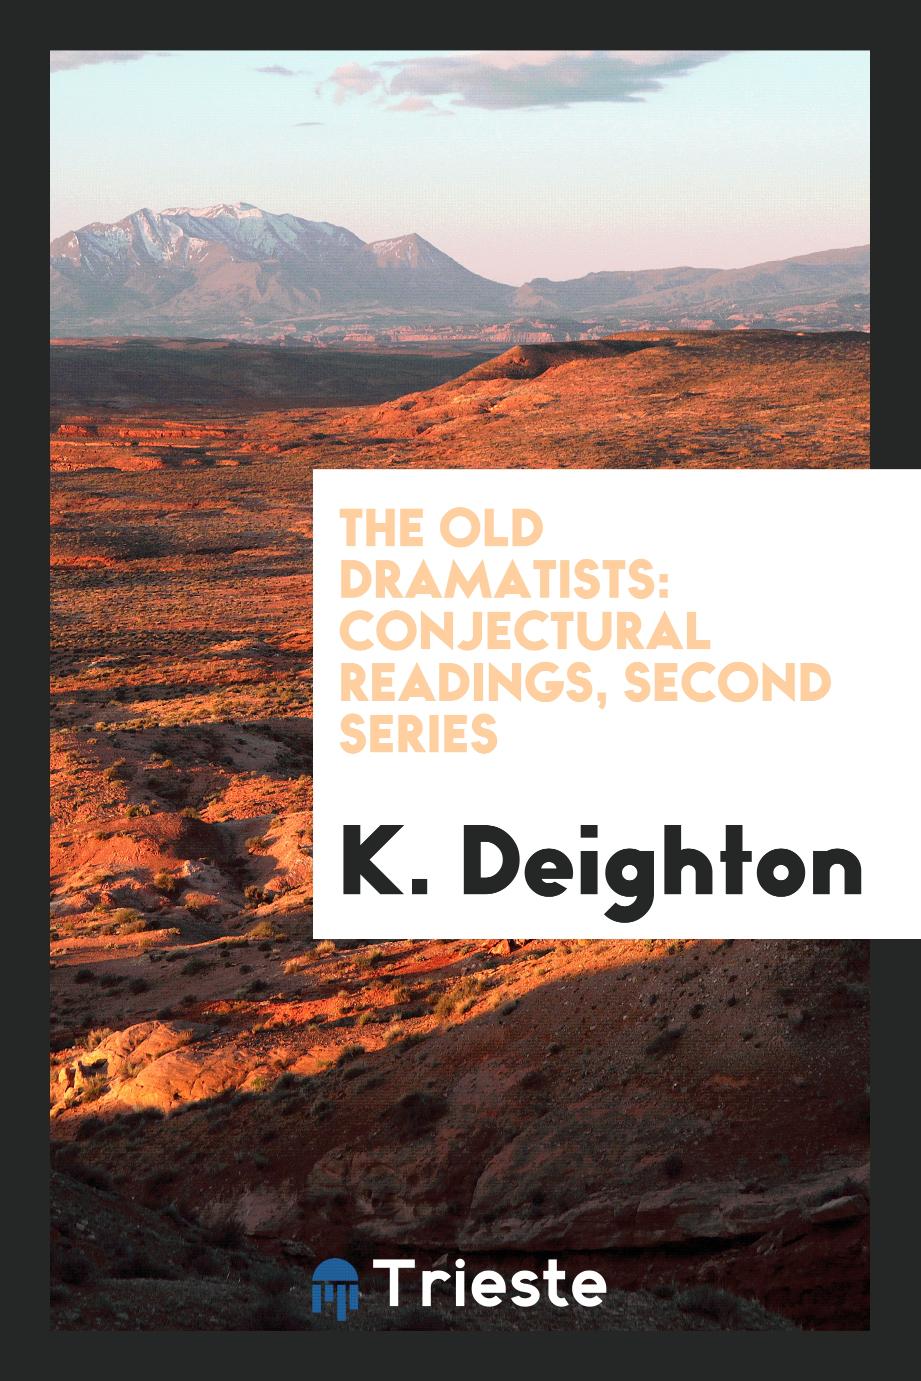 The Old Dramatists: Conjectural Readings, Second Series